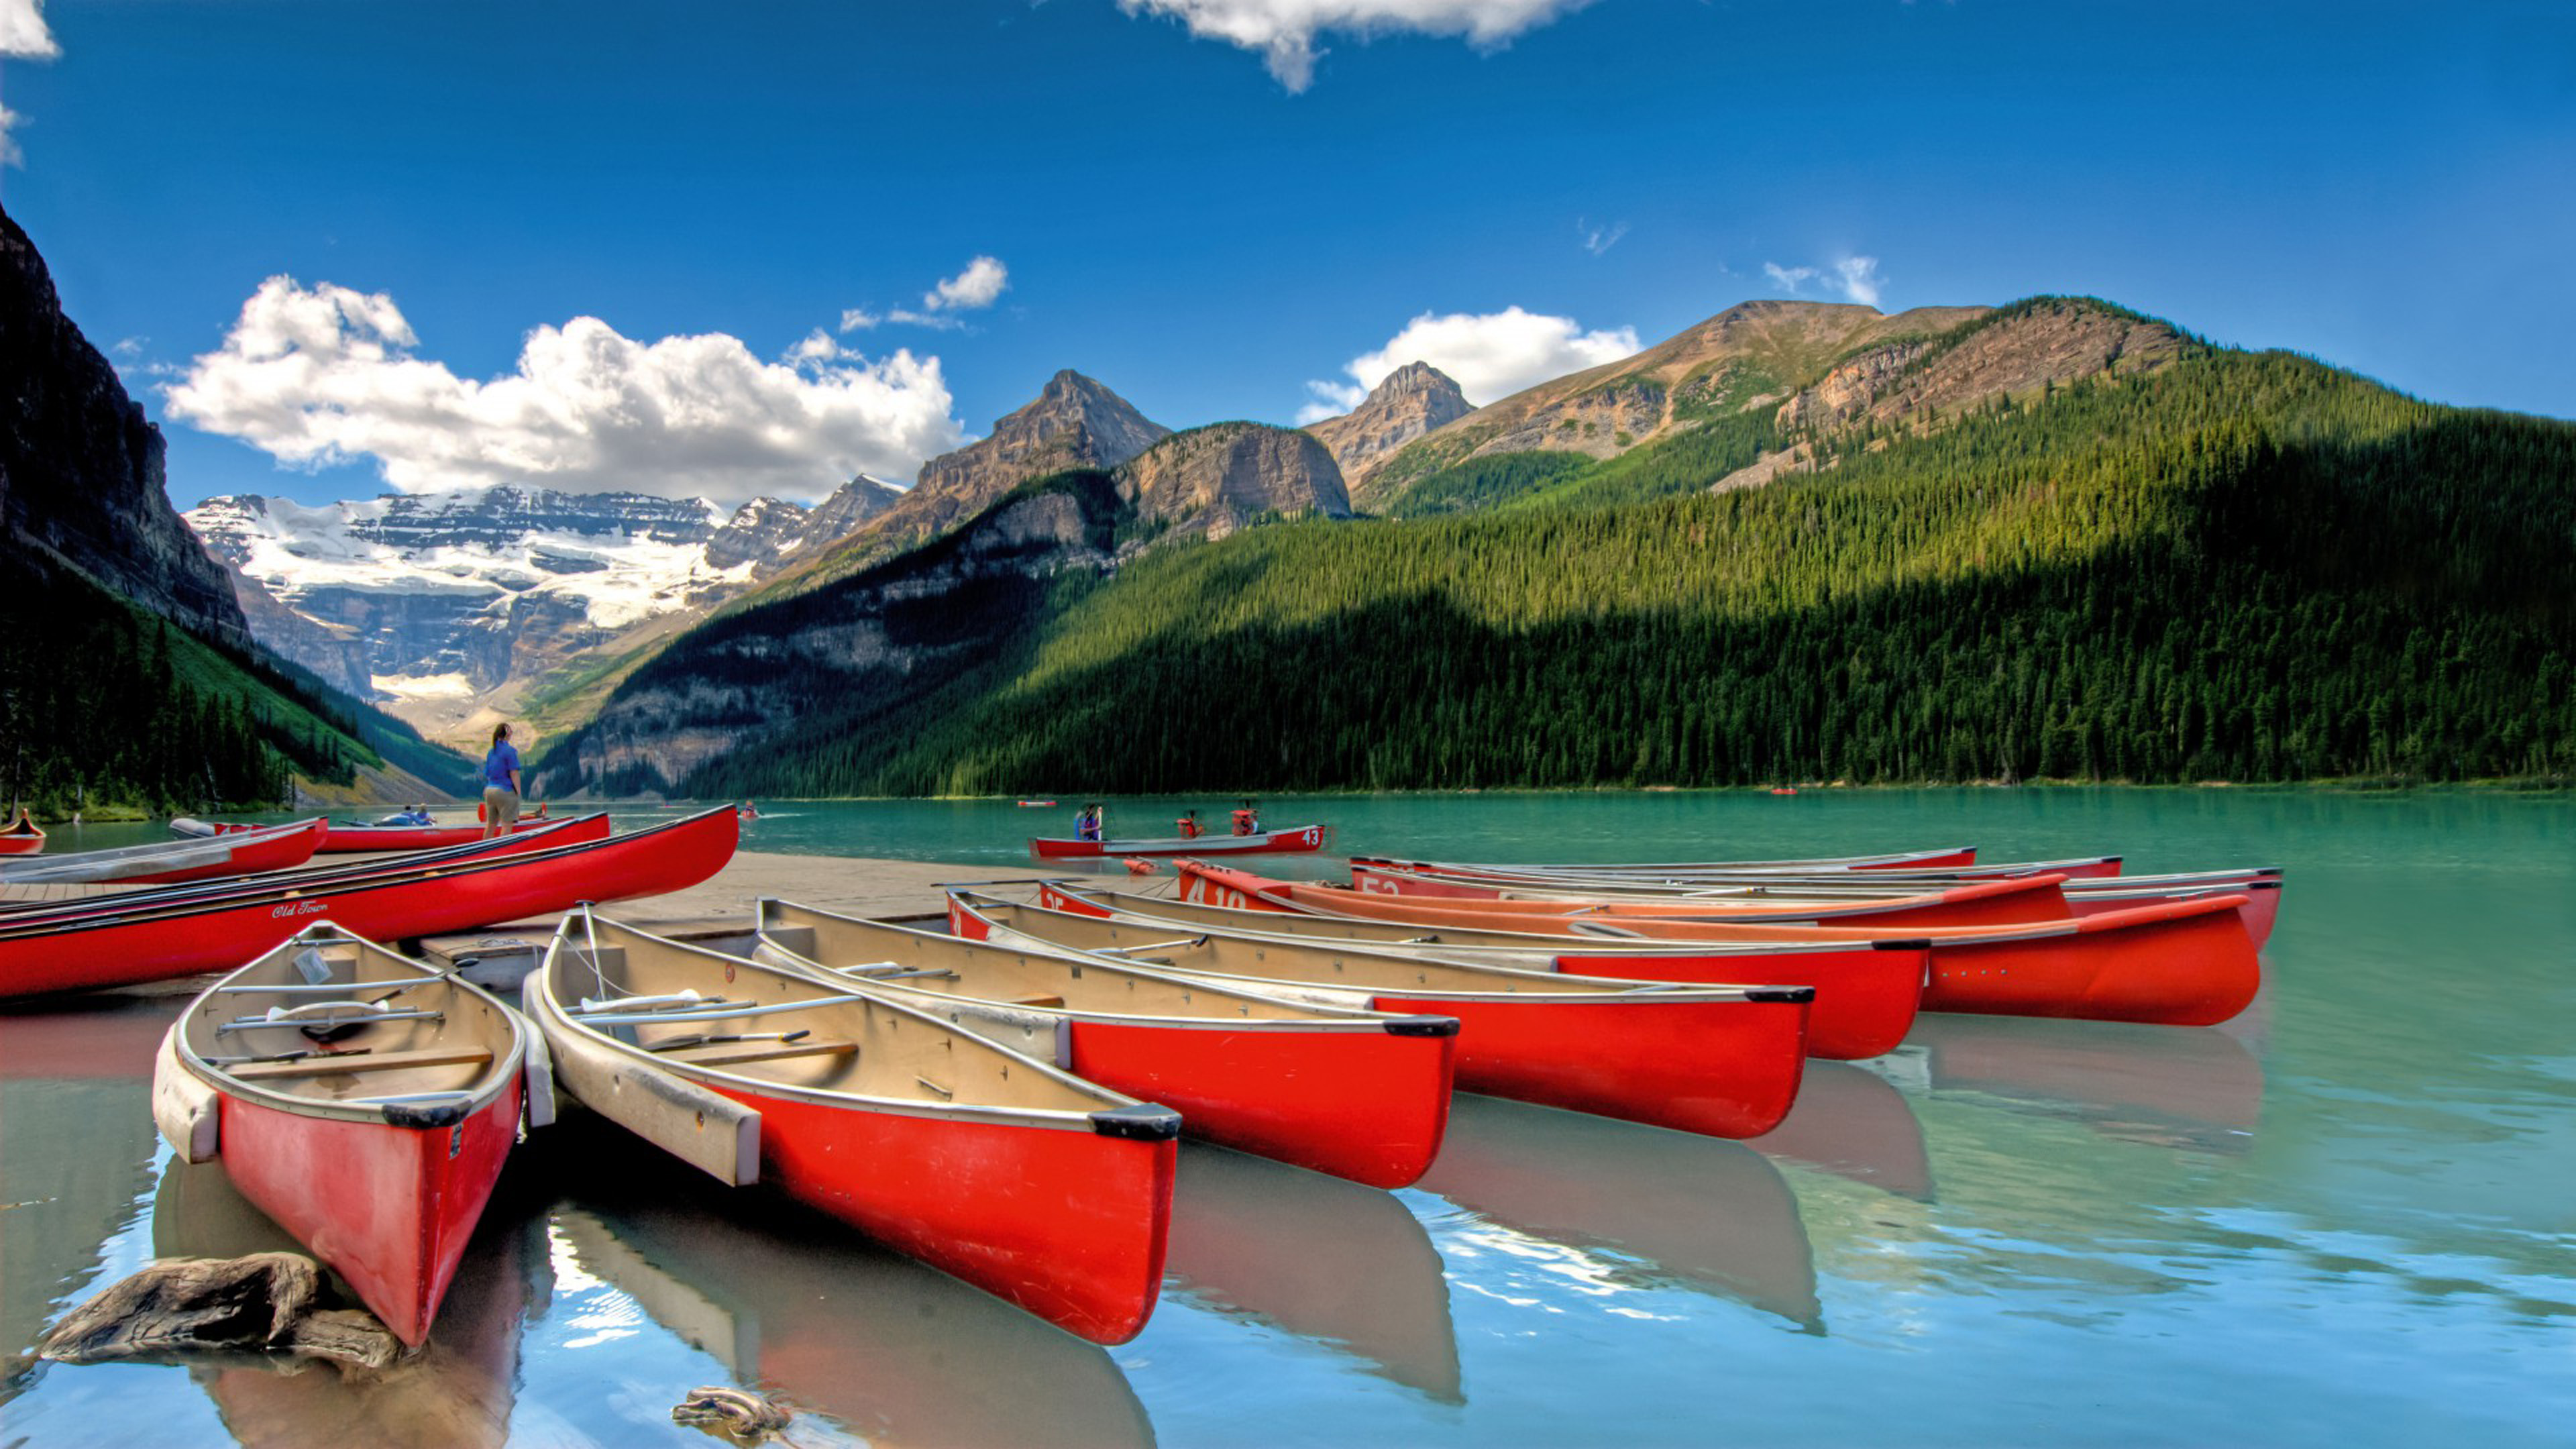 Lake Louise Is A Hamlet In Alberta Canada Banff National Park